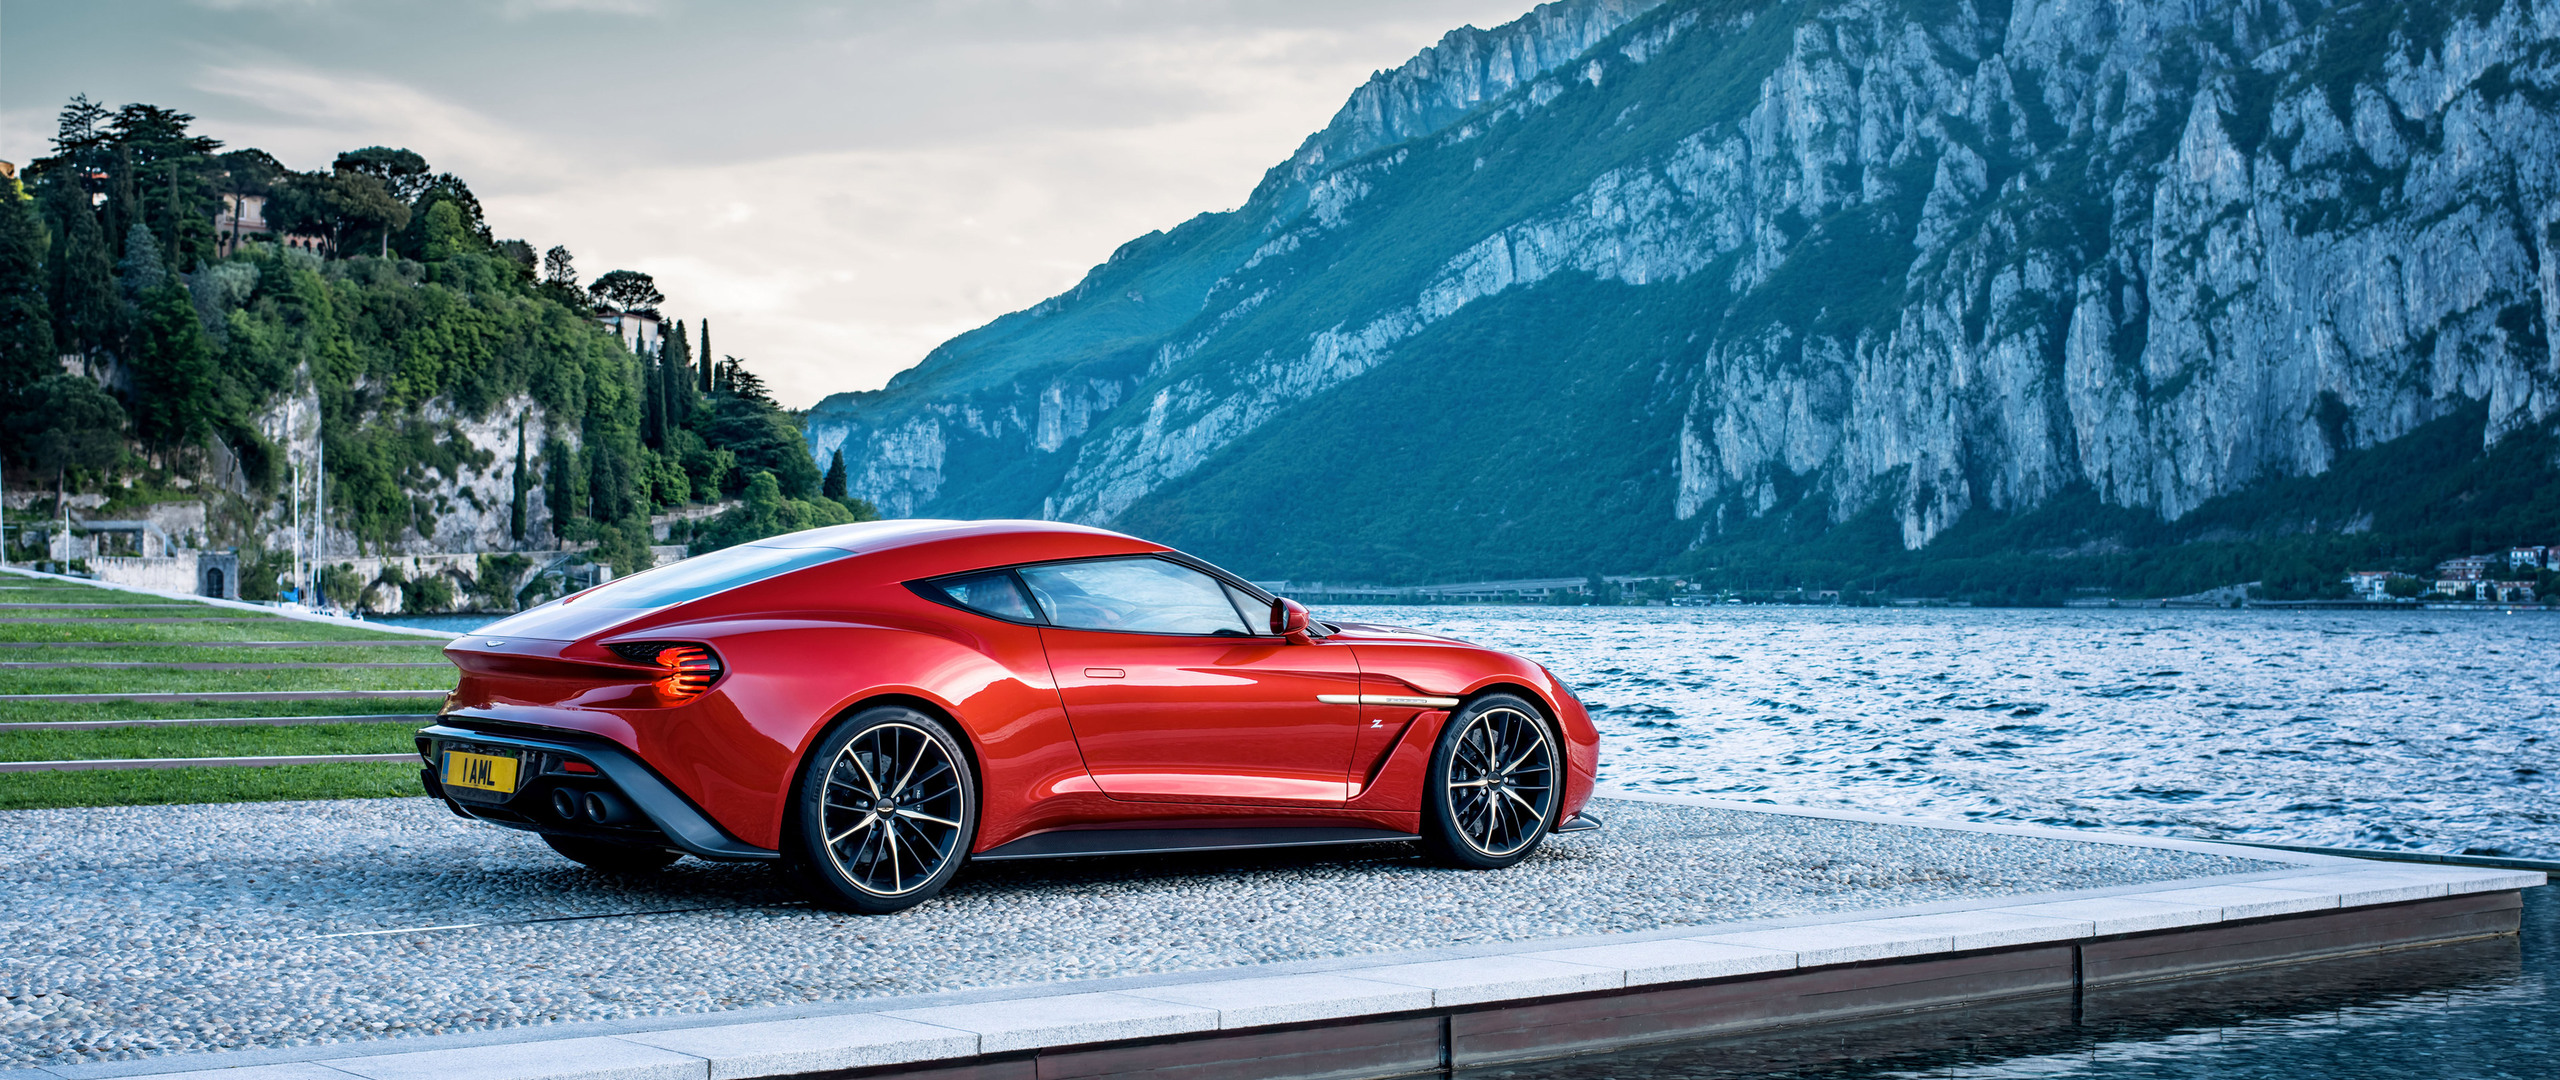 2560x1080 Aston Martin Vanquish Hd 2560x1080 Resolution Hd 4k Wallpapers Images Backgrounds Photos And Pictures